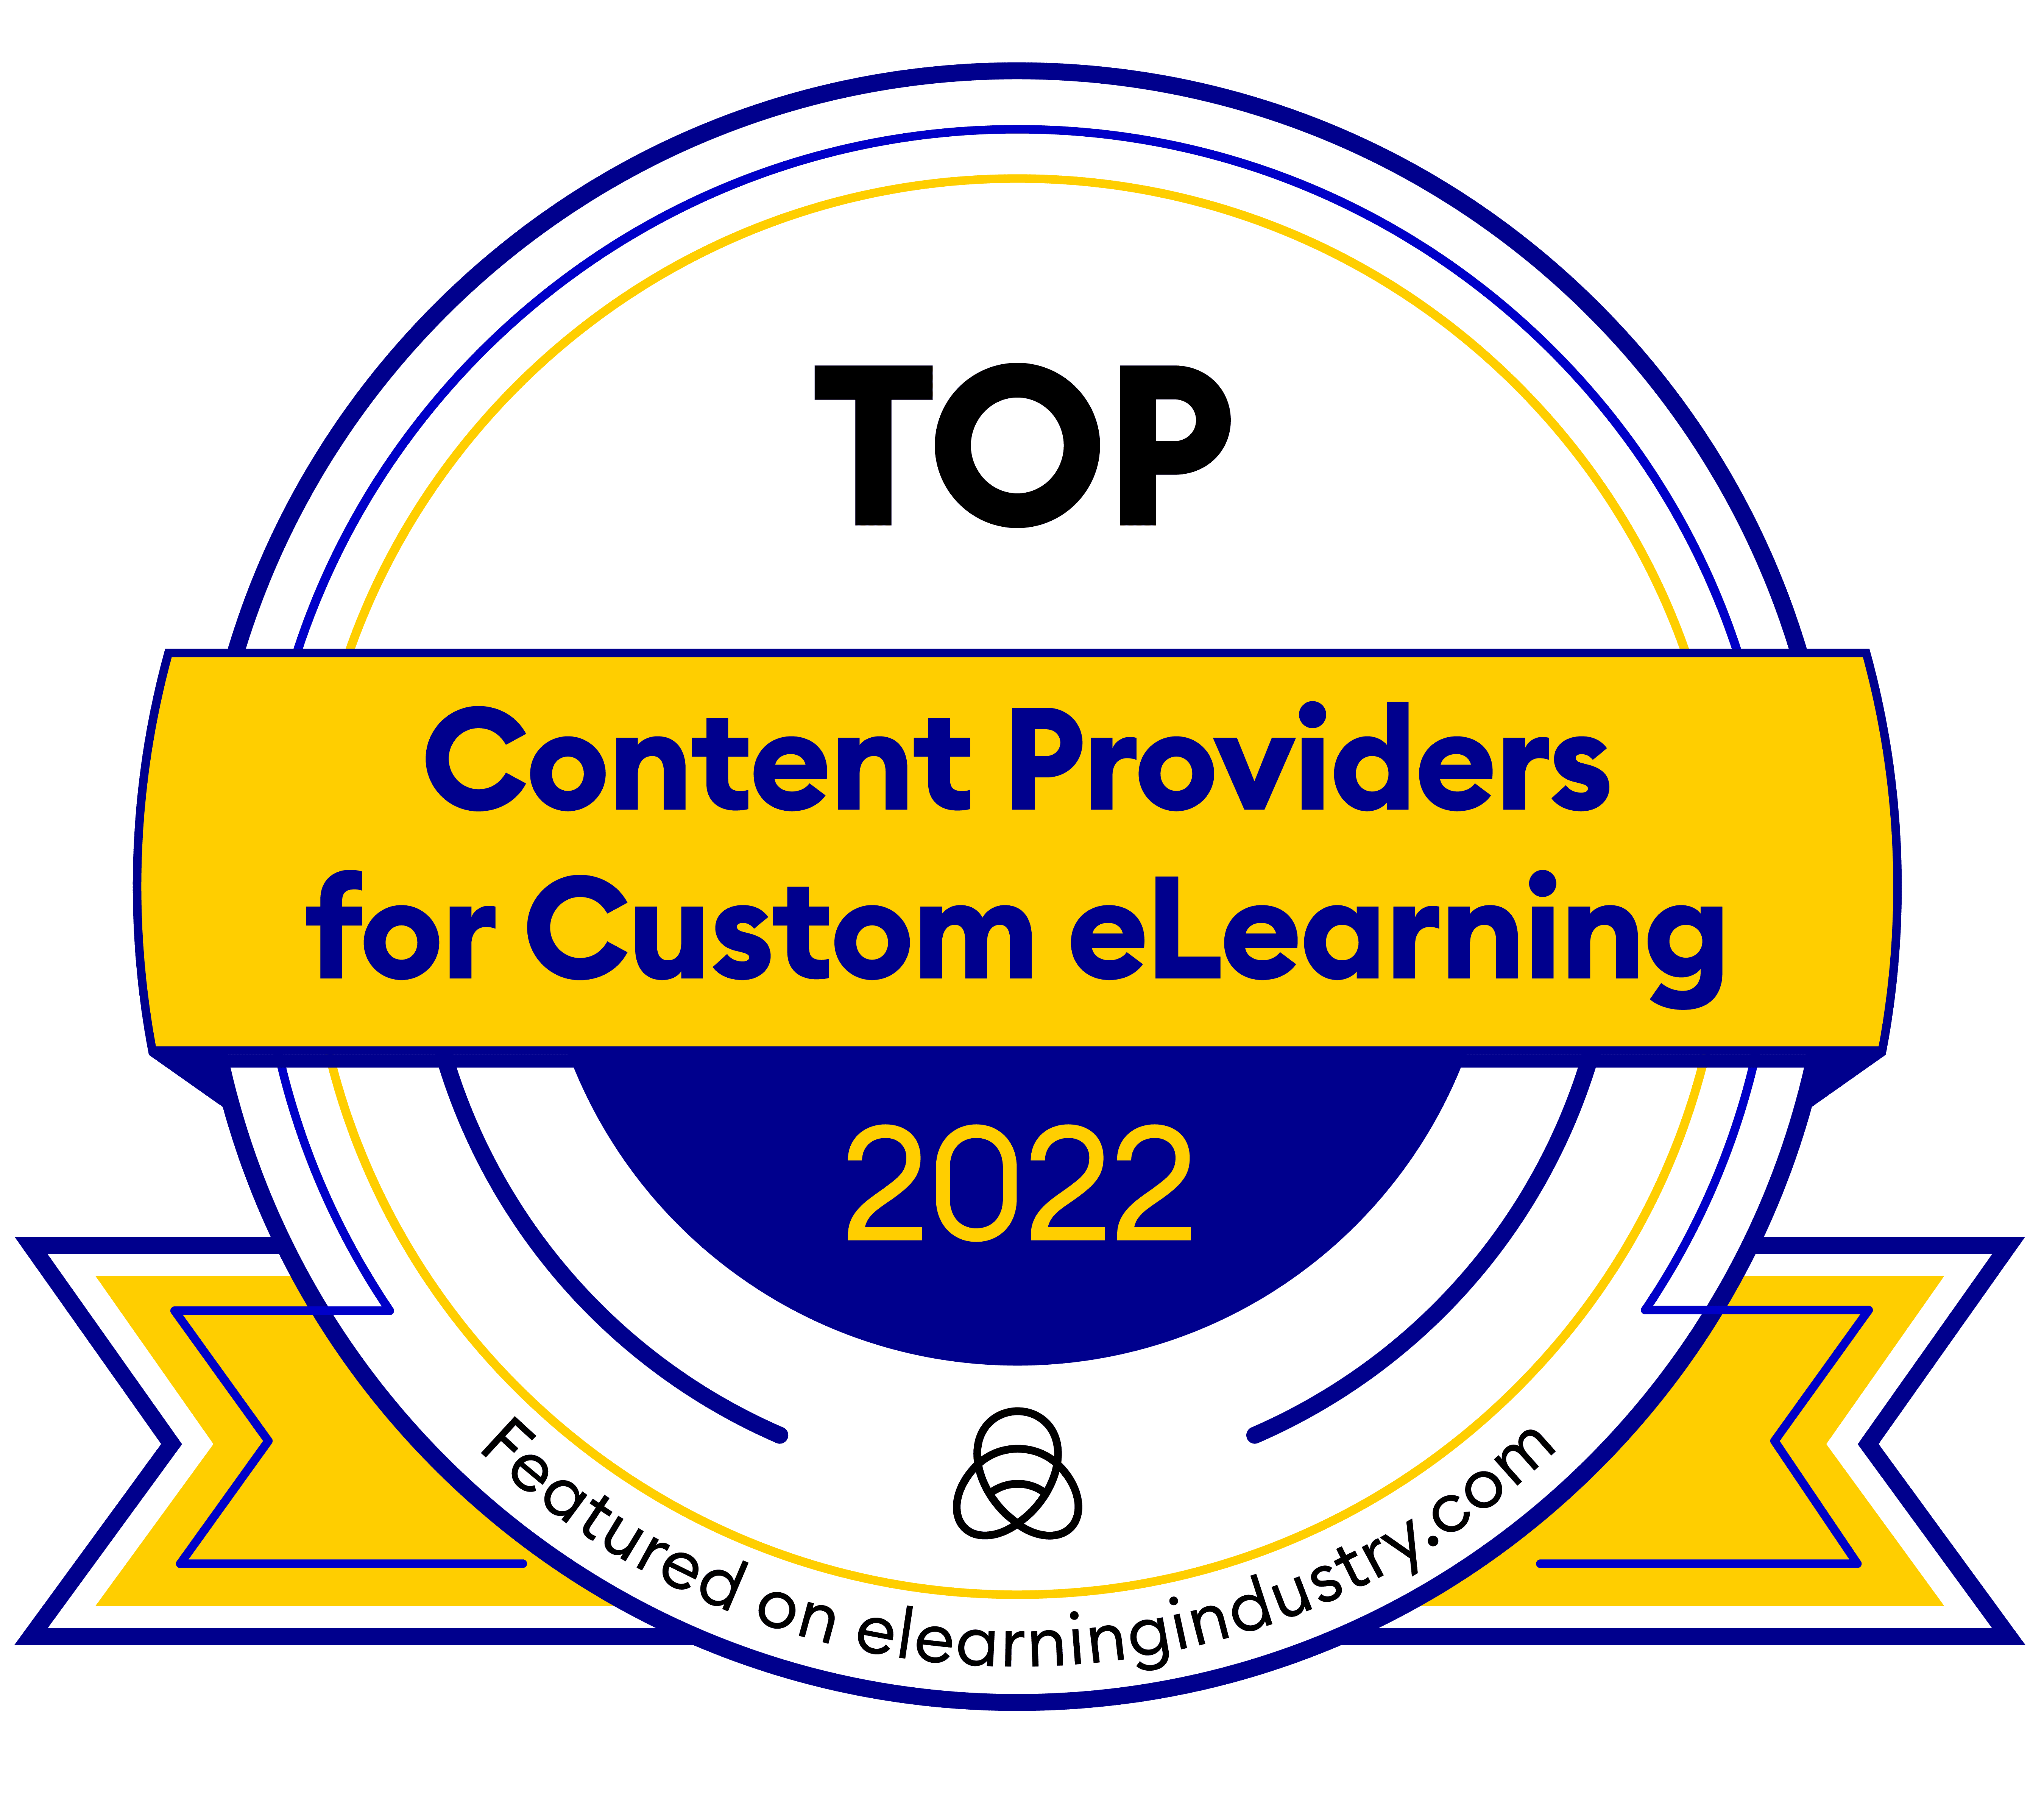 Tesseract Learning recognized as Top Content Providers for Custom eLearning 2022 from eLearning Industry